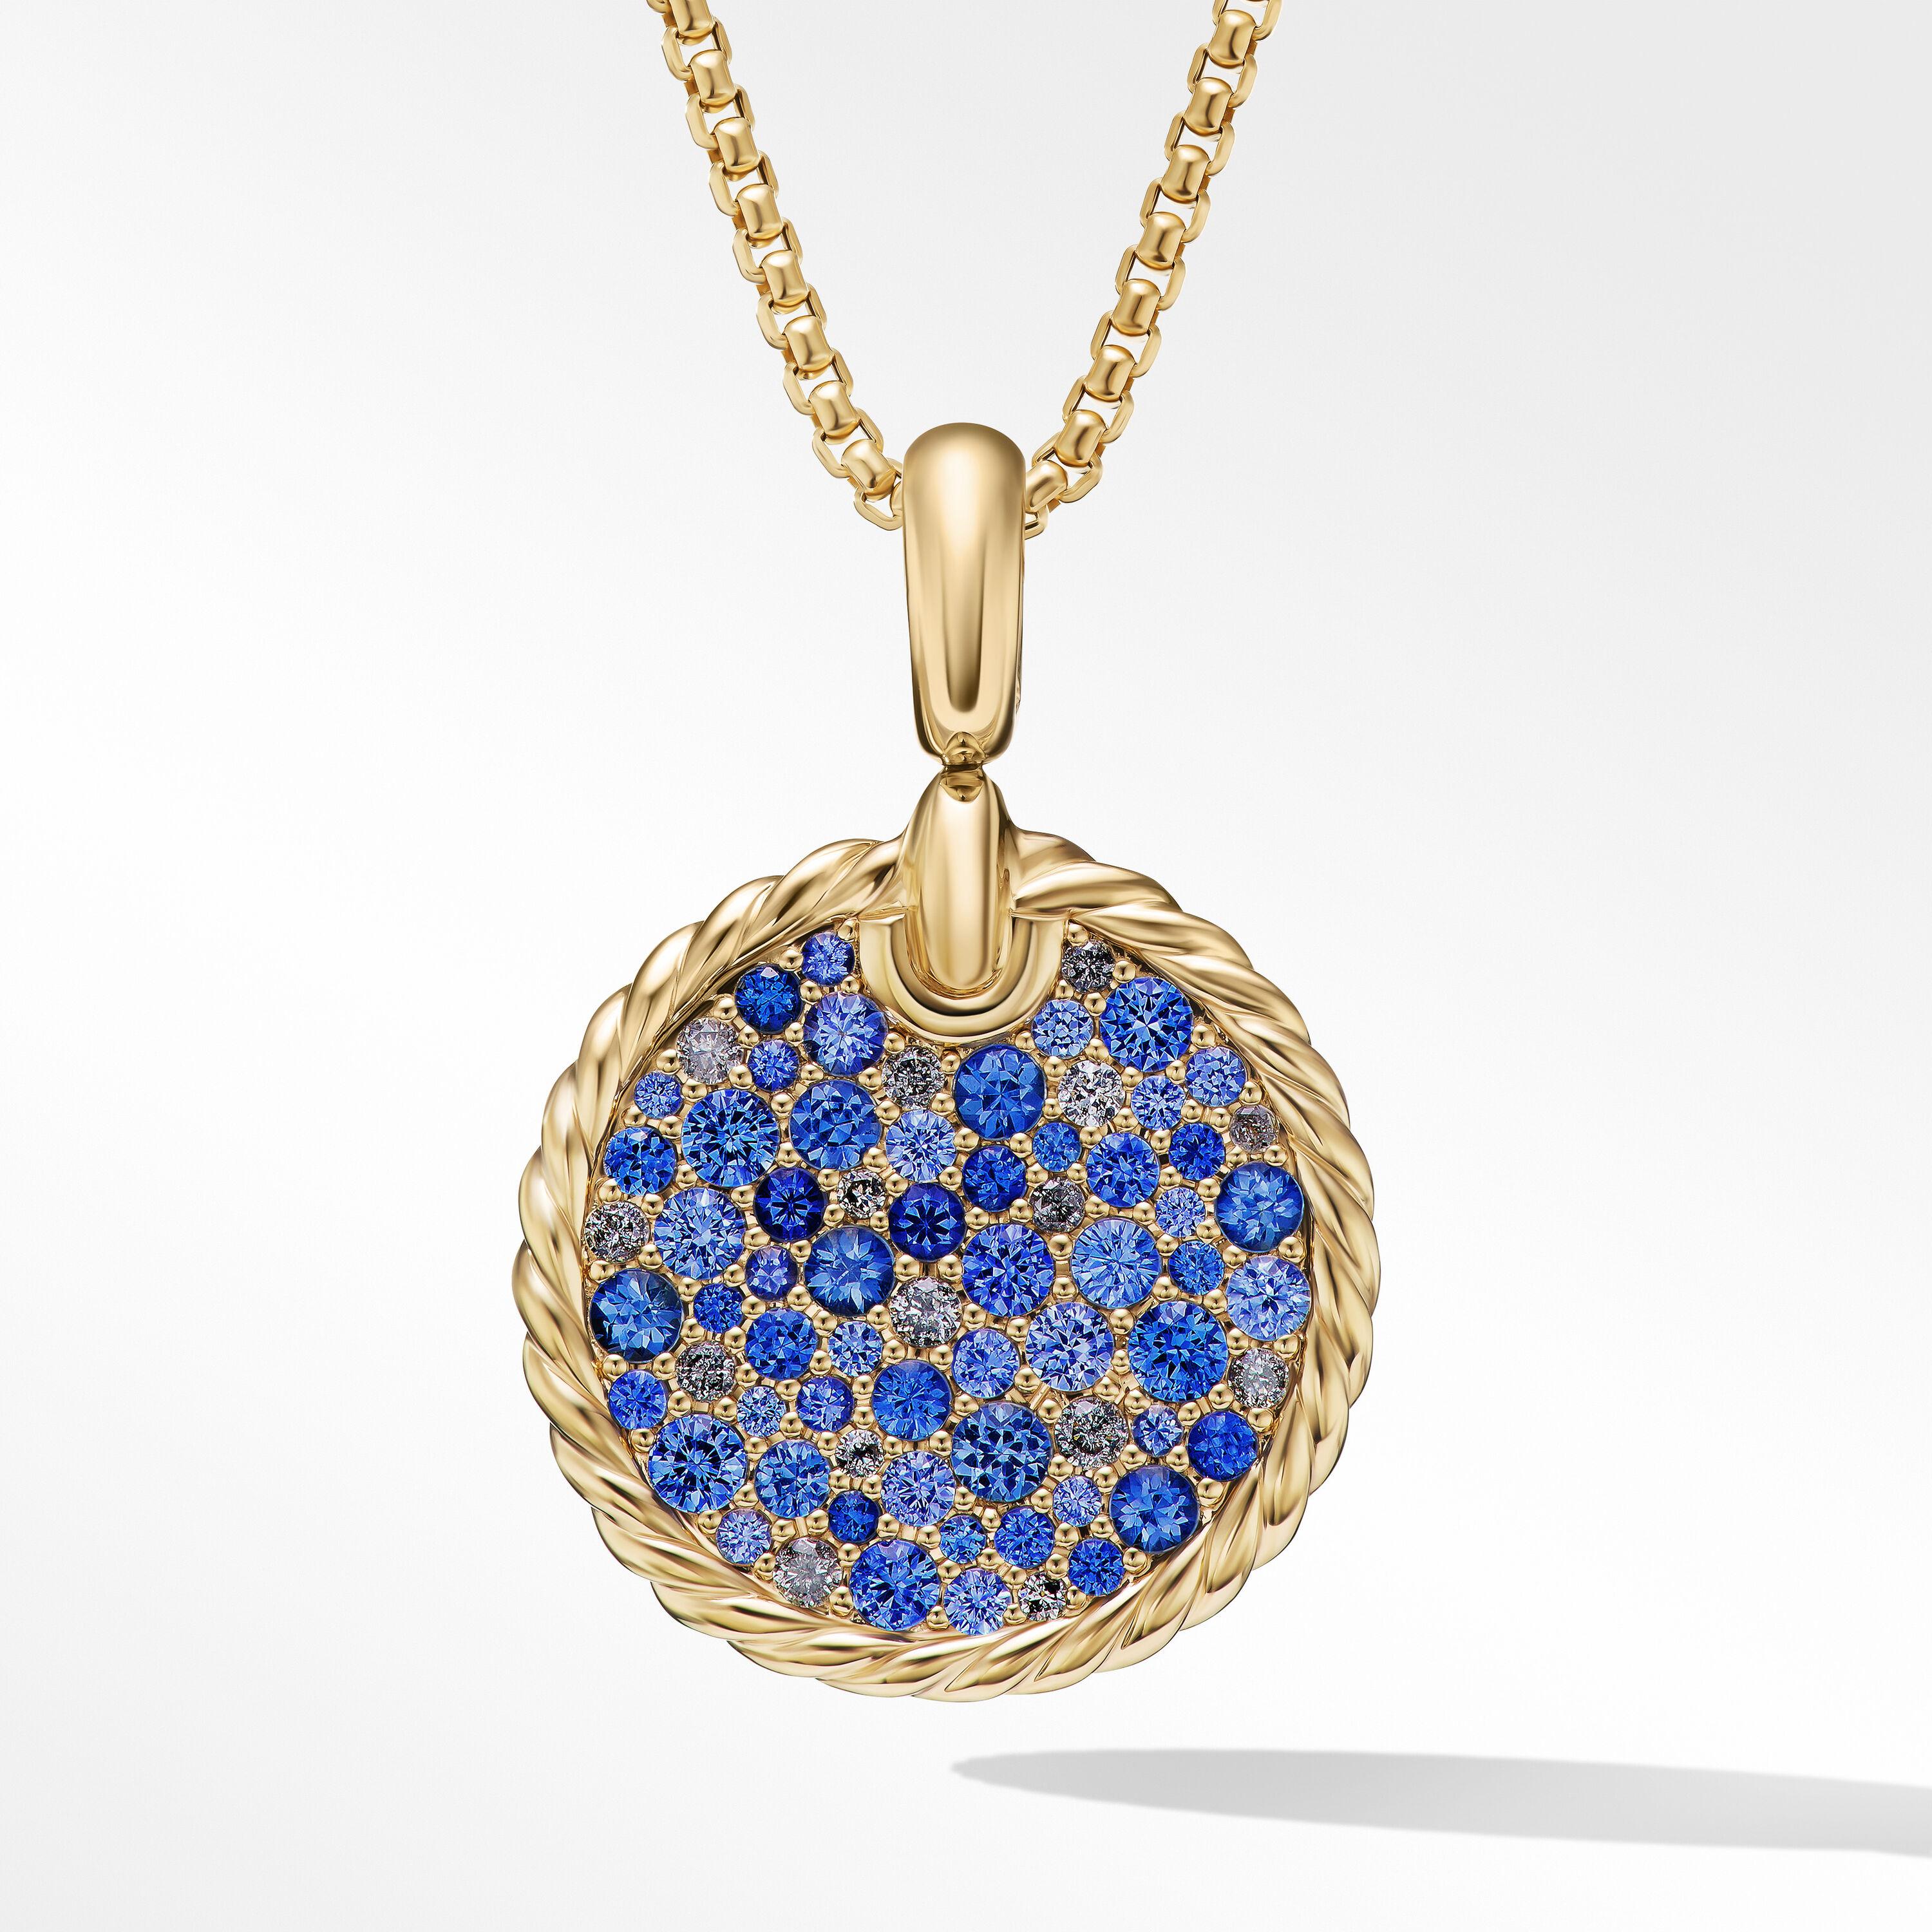 David Yurman DY Elements Water Pendant with Pave Blue Sapphires and Diamonds